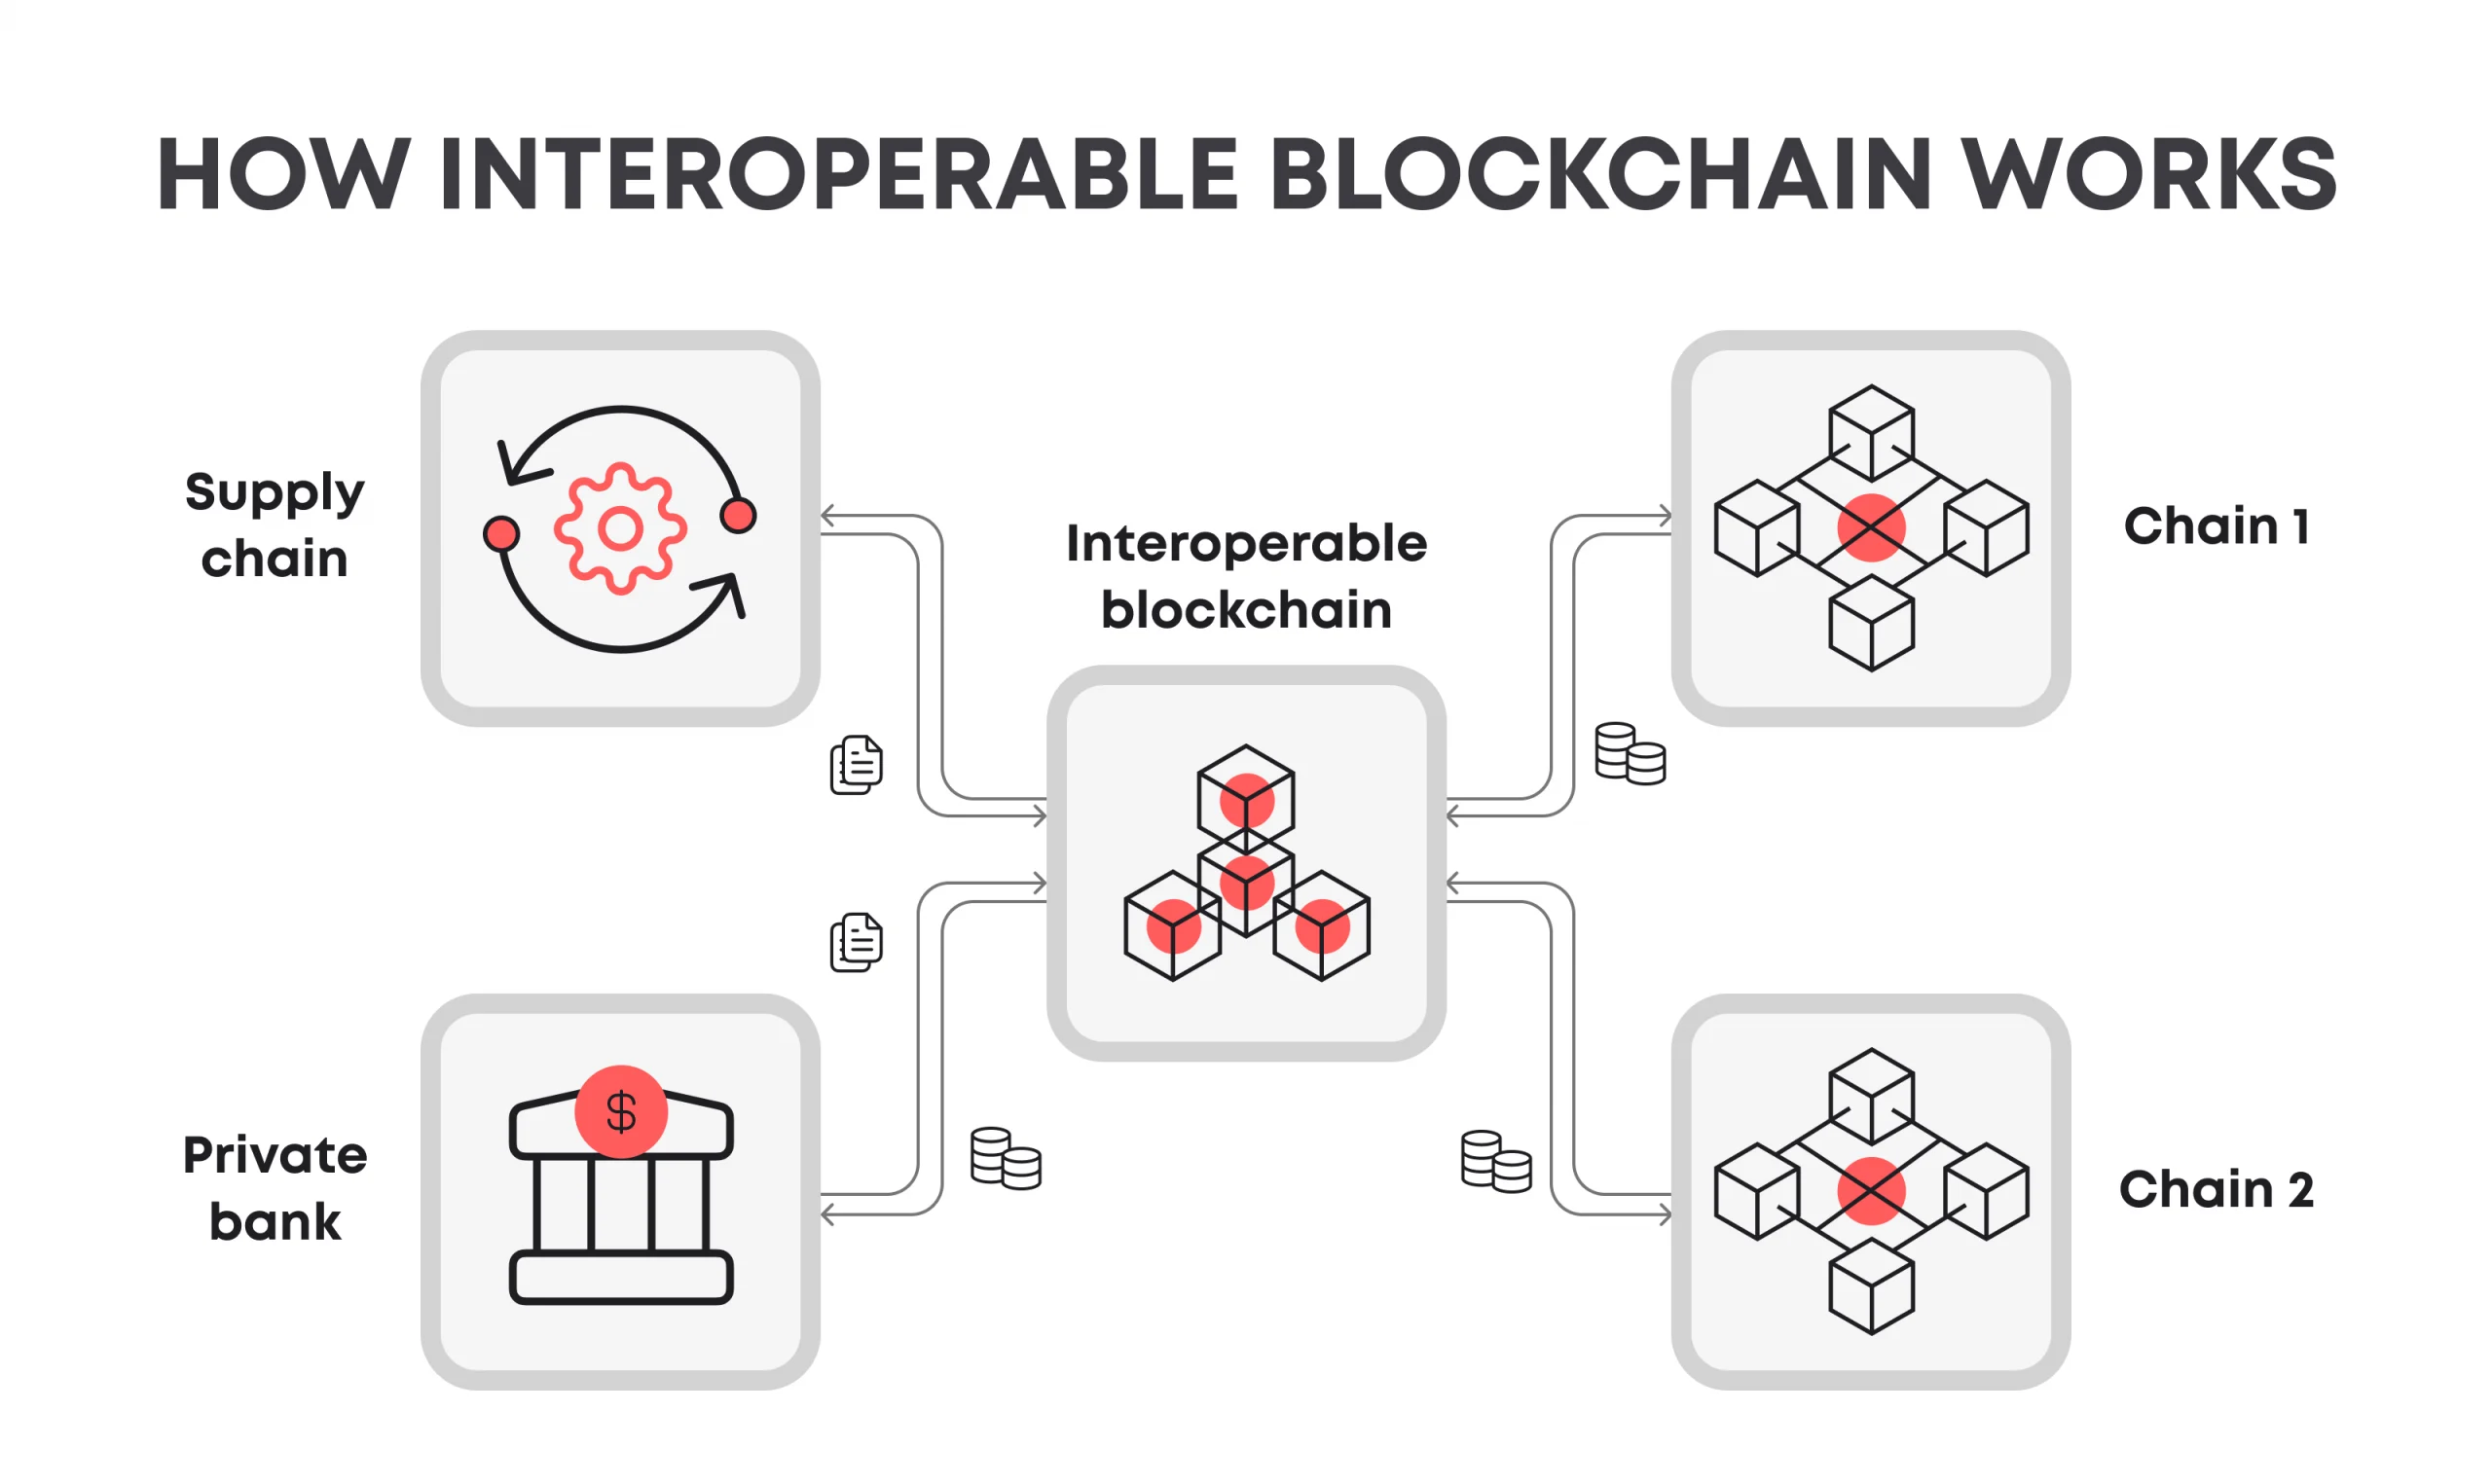 Cross-chain interoperability is an essential component for the future scalability, versatility, and adoption of blockchain technologies.